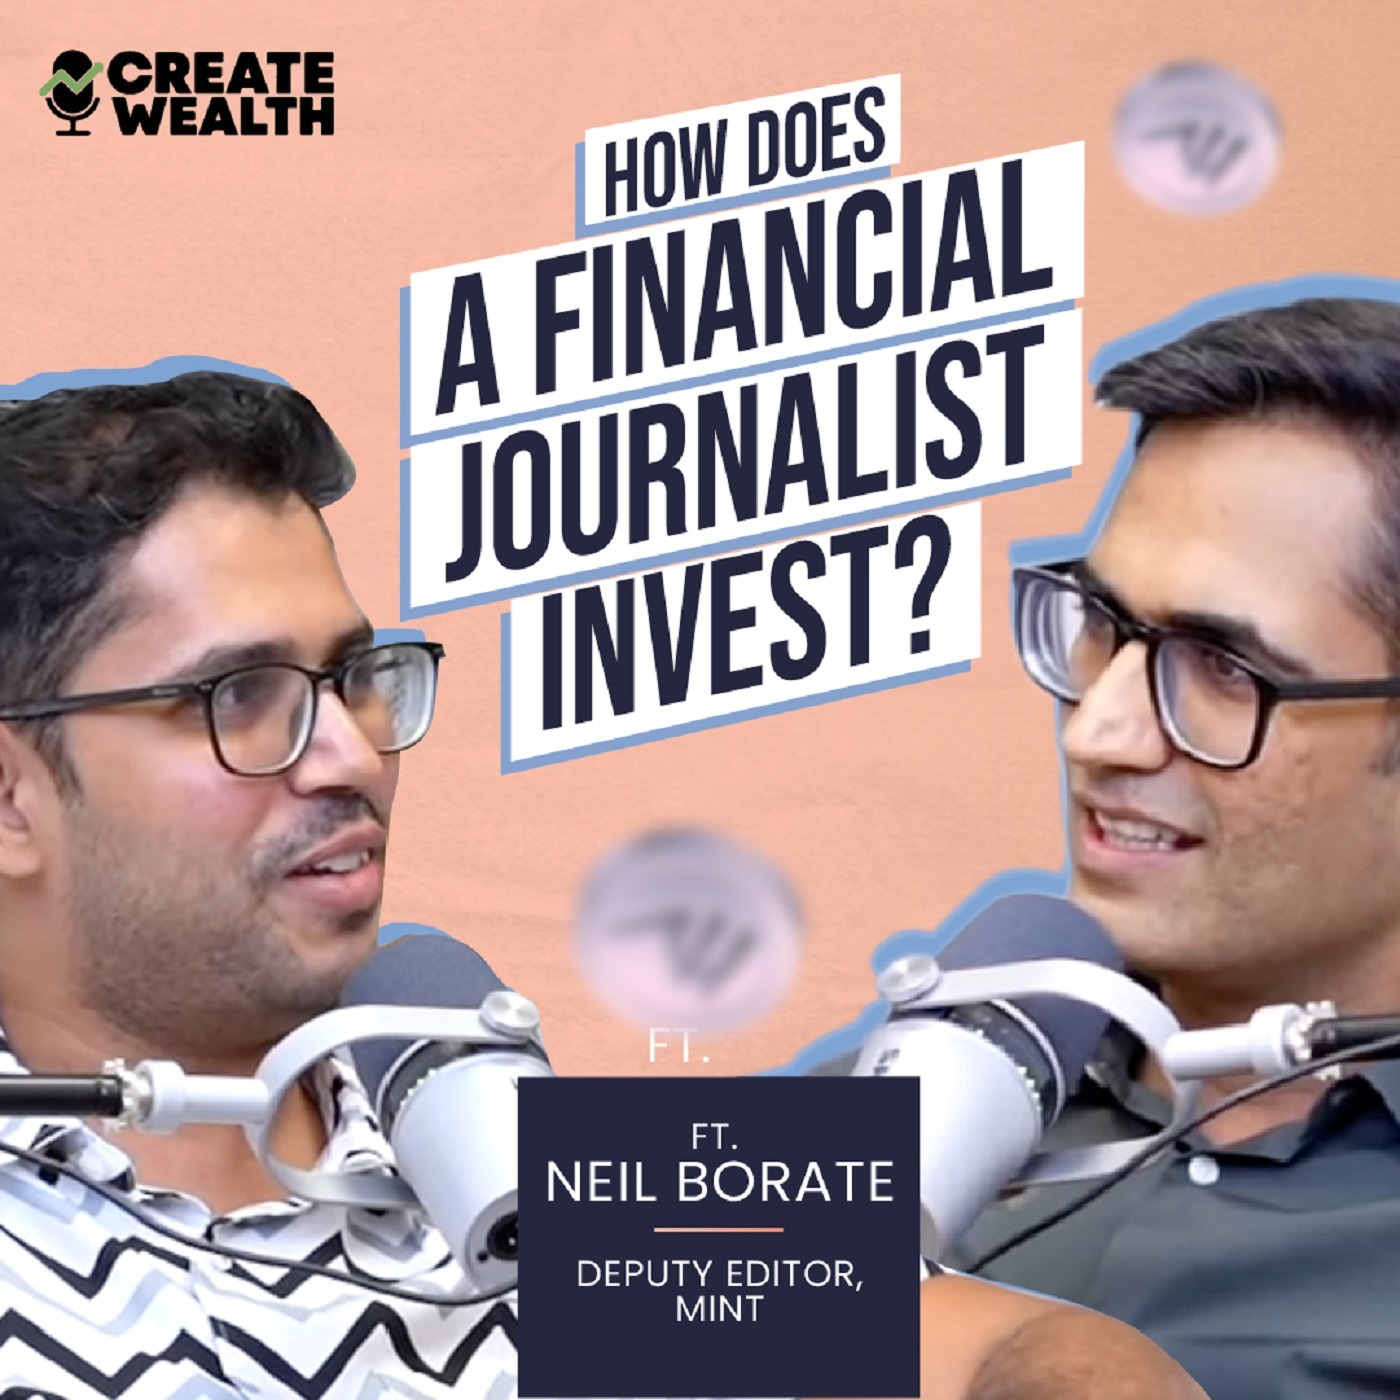 Neil Borate, Deputy Editor - Mint reveals HOW HE INVEST HIS OWN MONEY | Create Wealth Ep 6